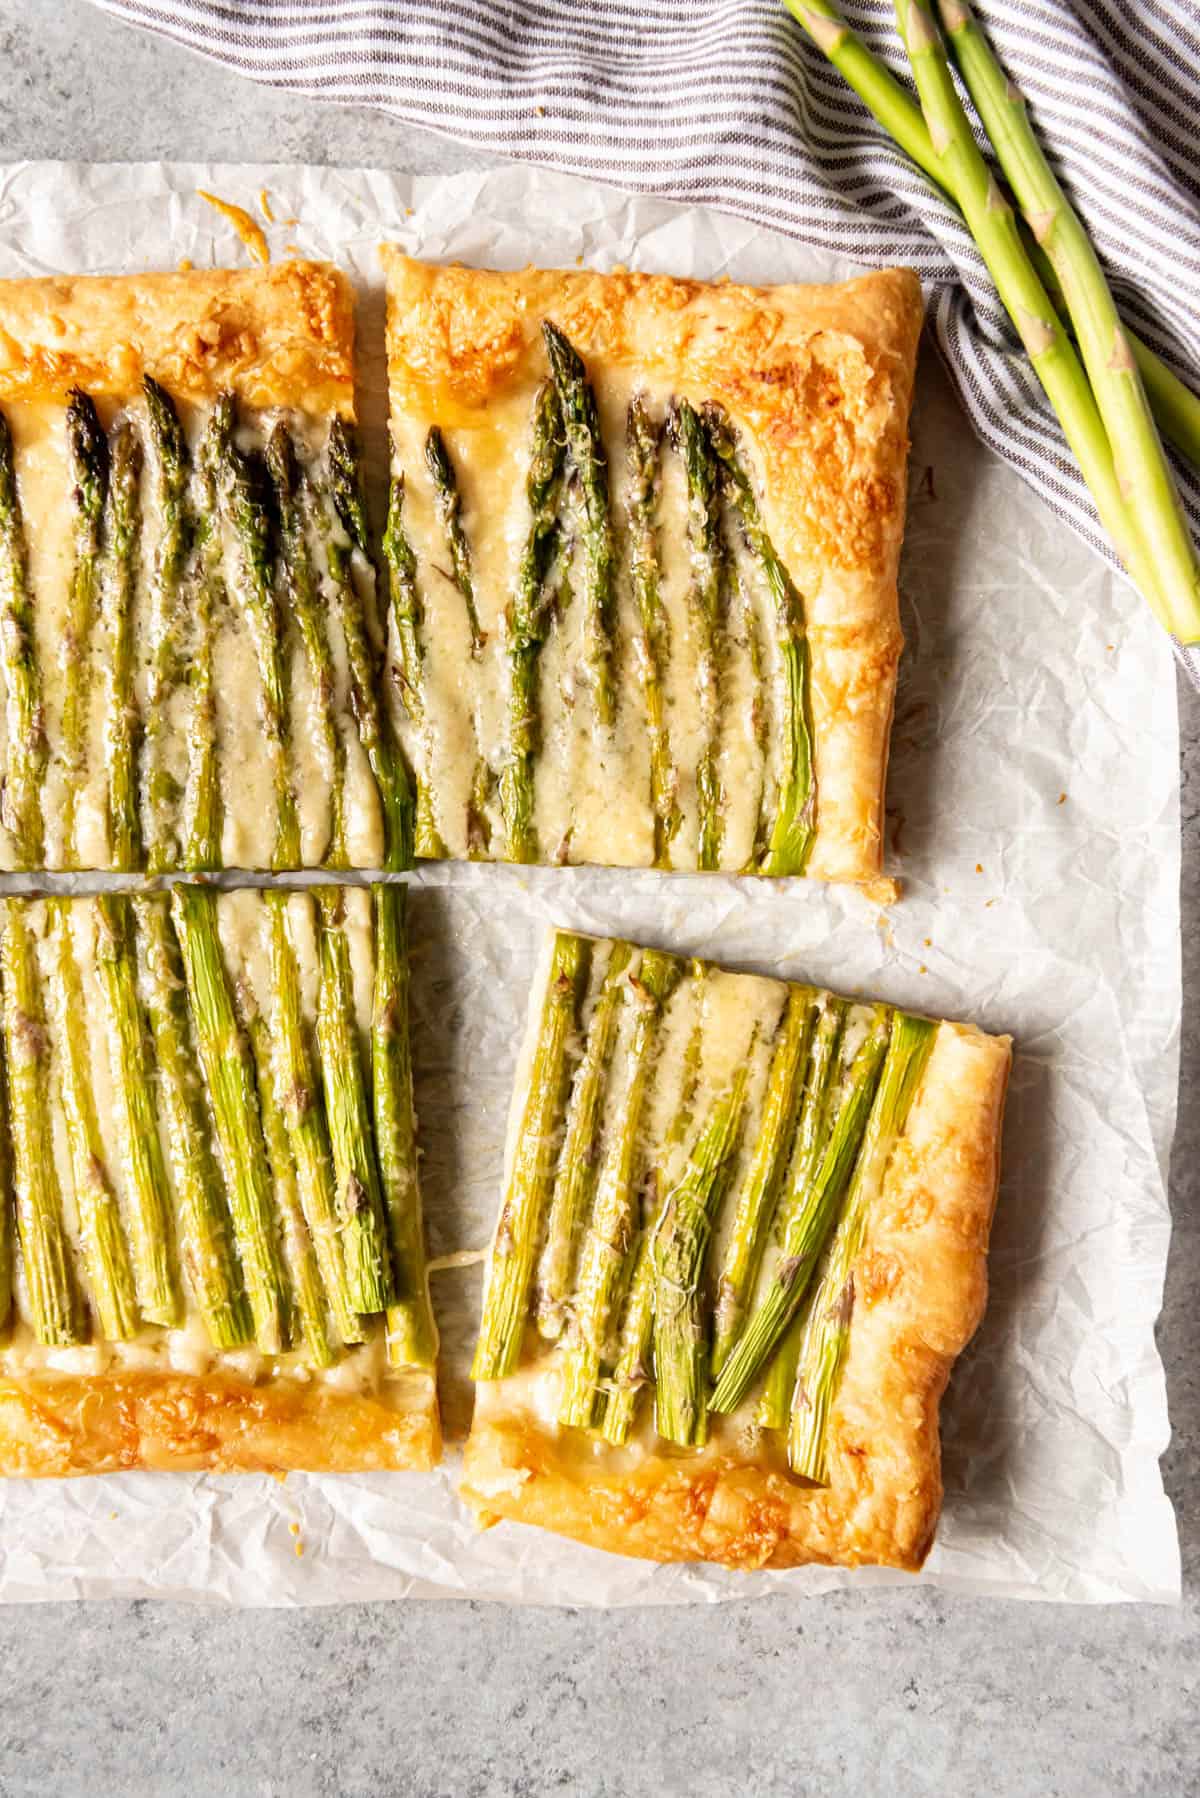 An image of an easy brunch appetizer made with puff pastry, cheese, dijon mustard, and asparagus.